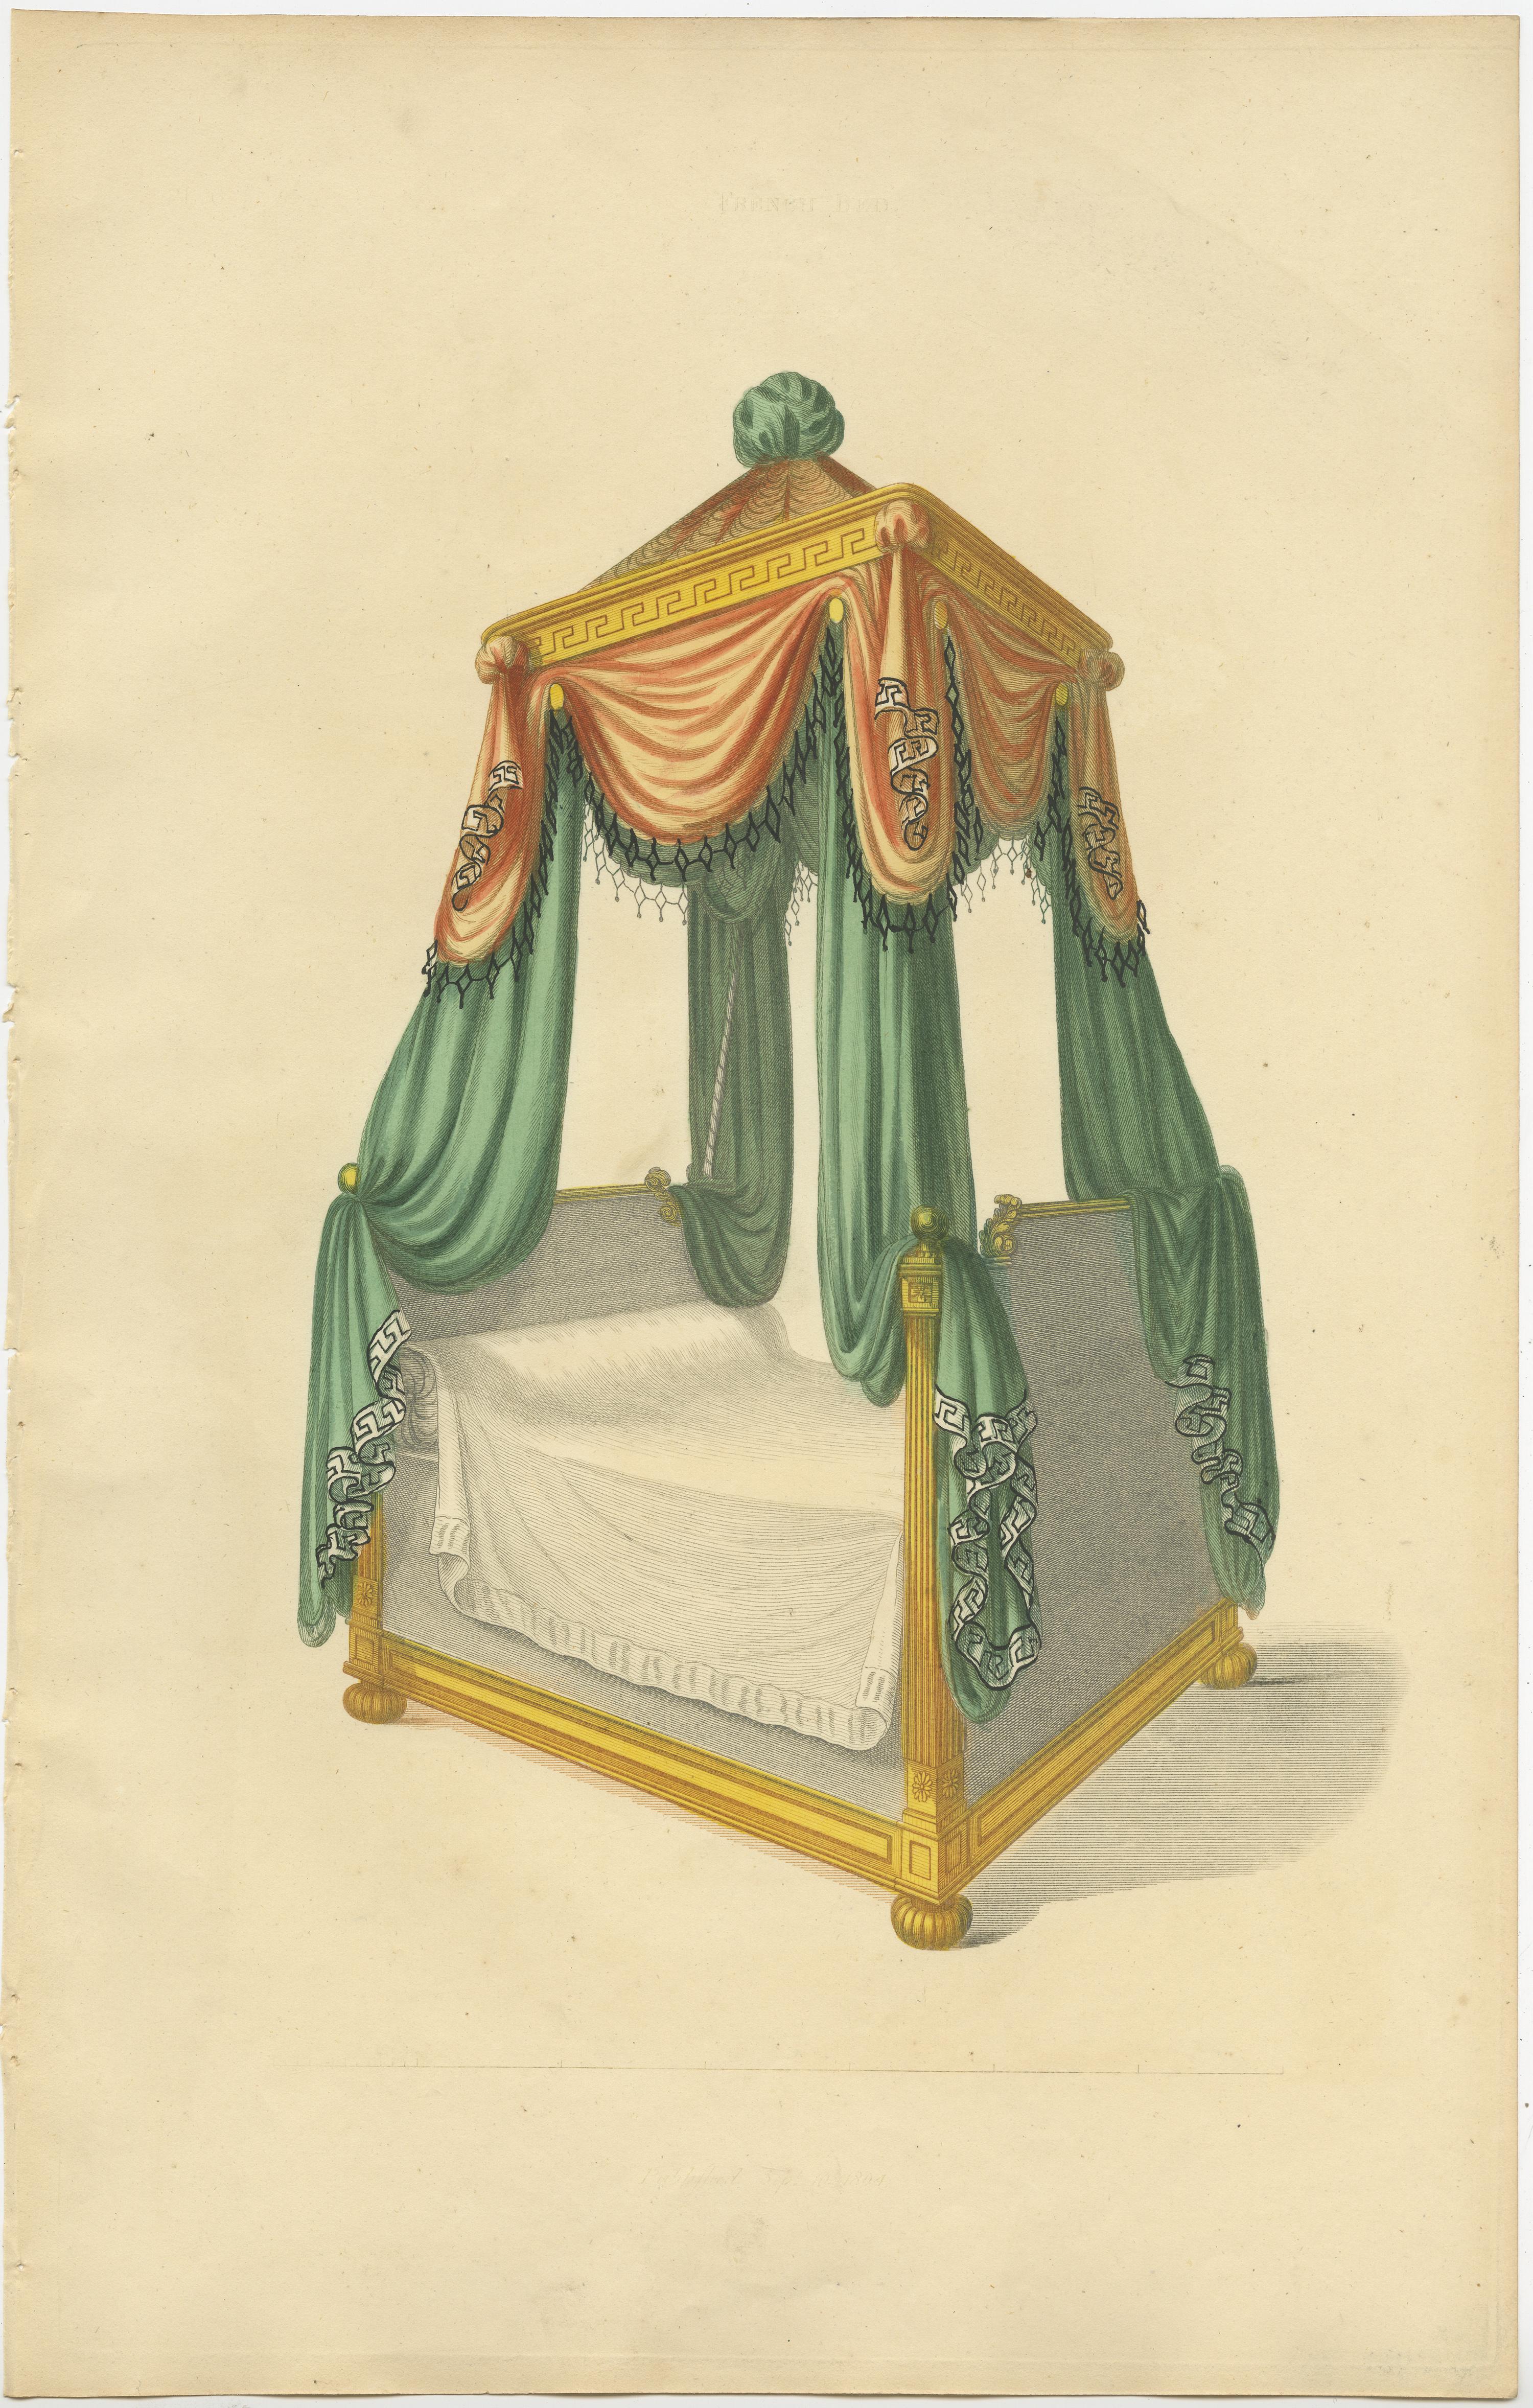 Set of 7 Antique Prints of Beds with Drapery by Sheraton '1805' For Sale 2